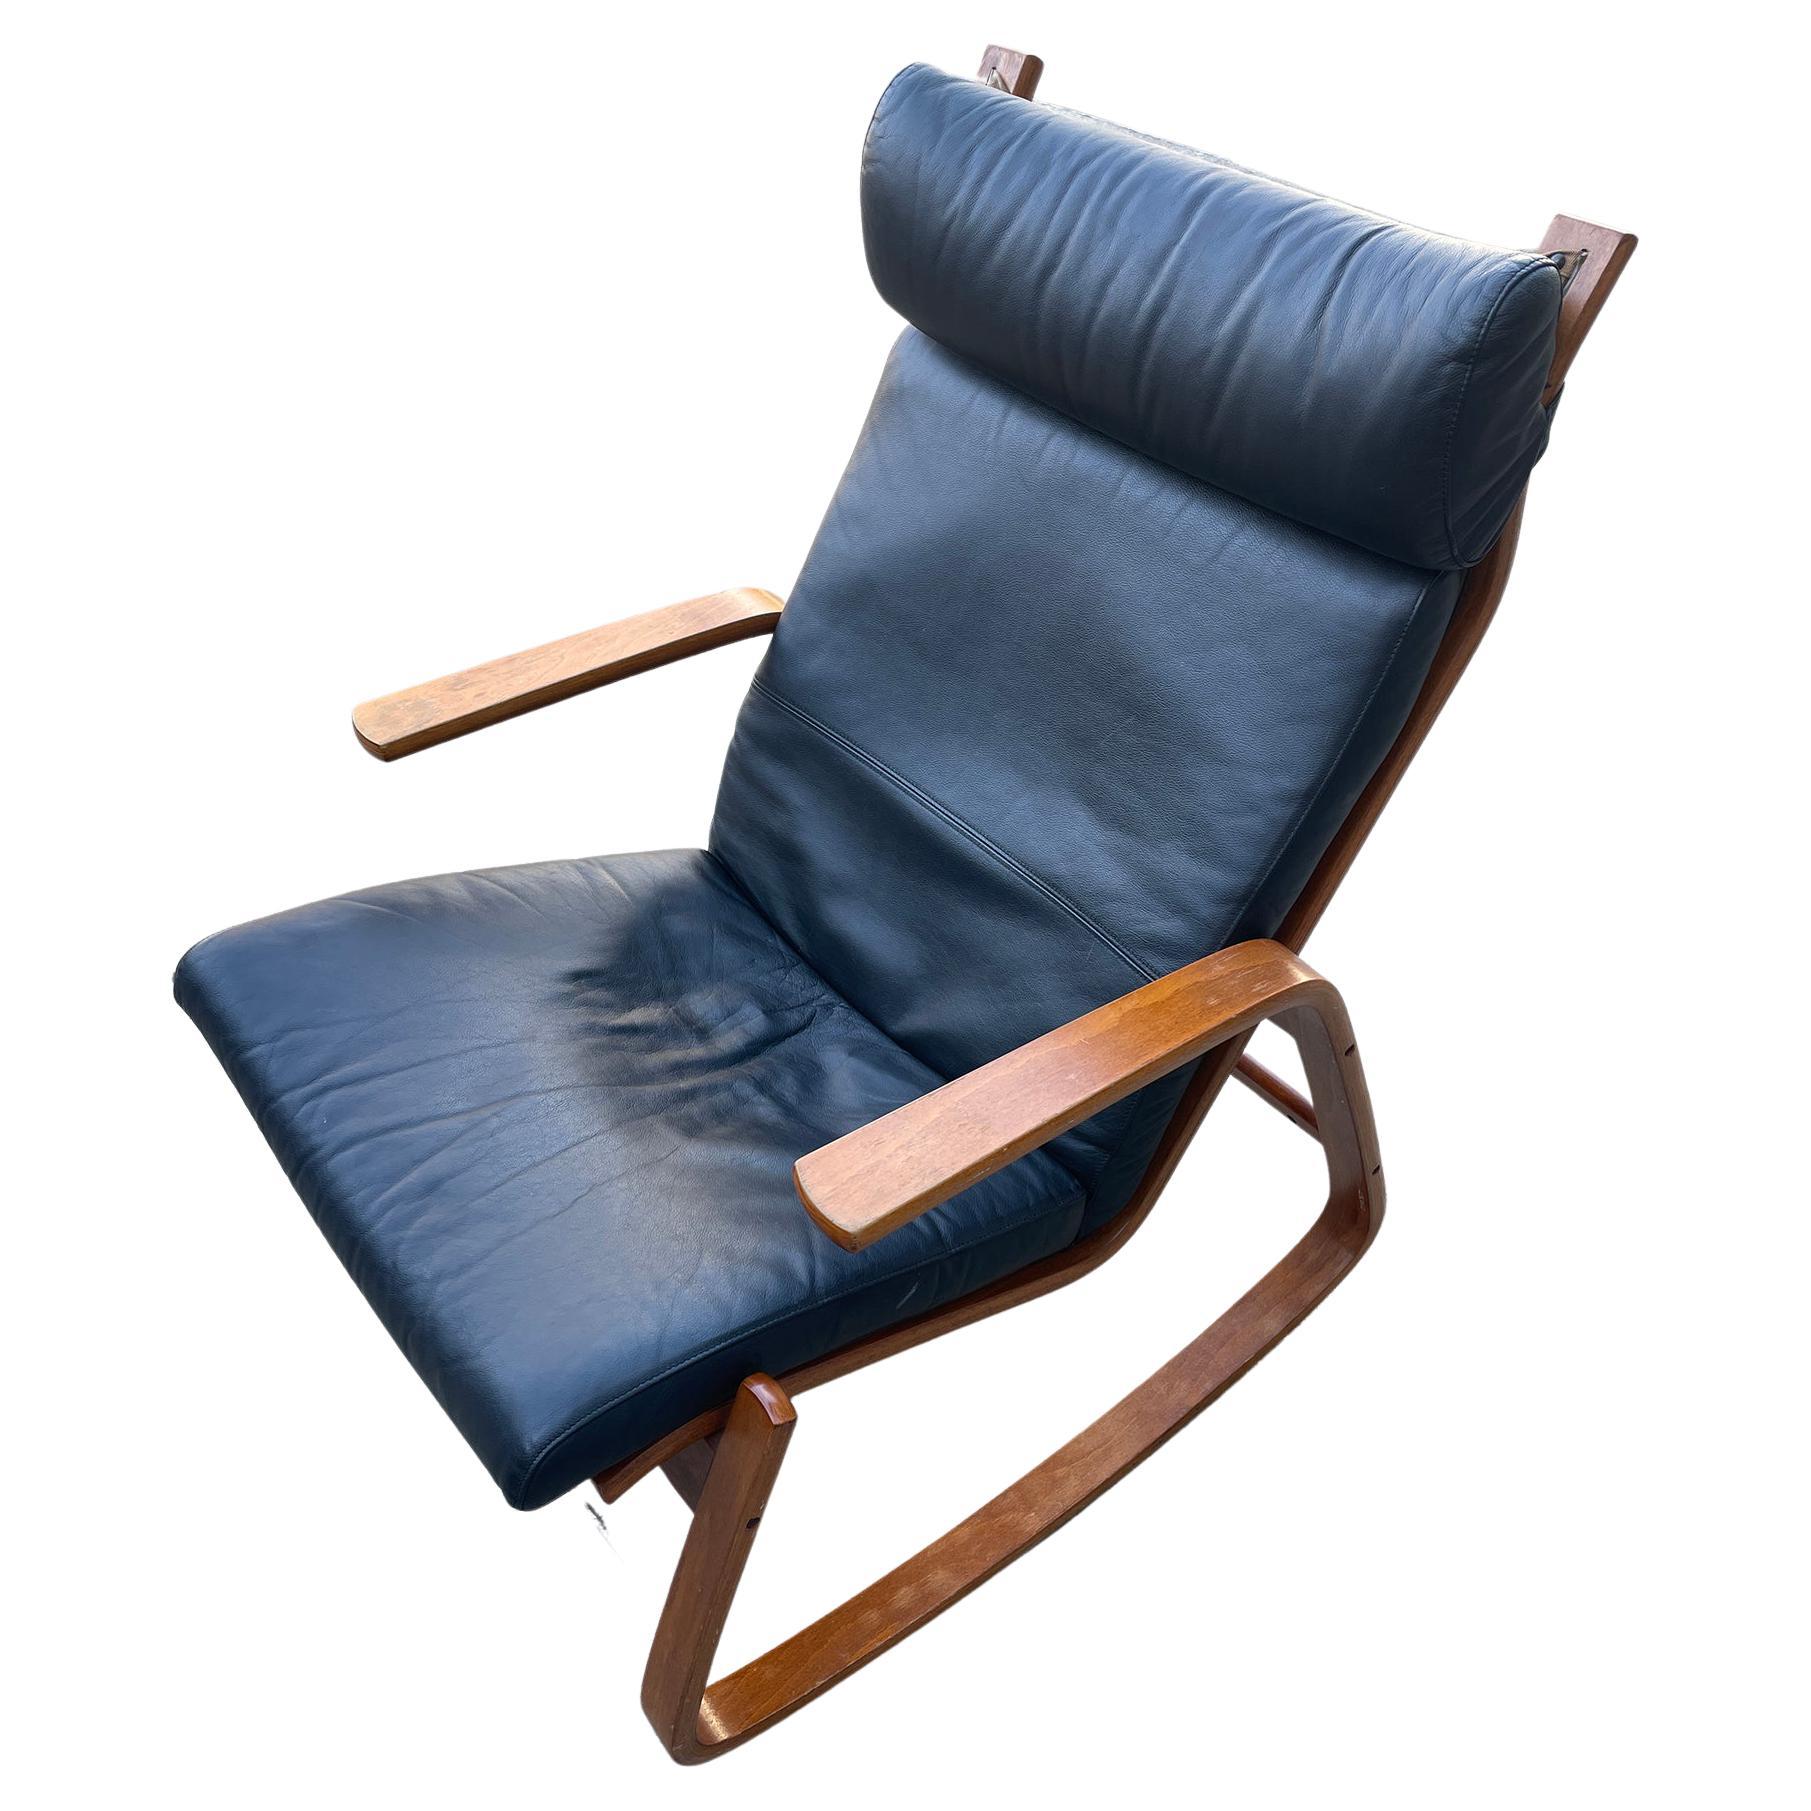 A stylish Scandinavian Modern teak rocking chair designed by Ingmar Relling for Westnofa. The chair features a solid teak bentwood frame and sleek Scandinavian design. It has the black leather upholstery over original canvas. Could be easily